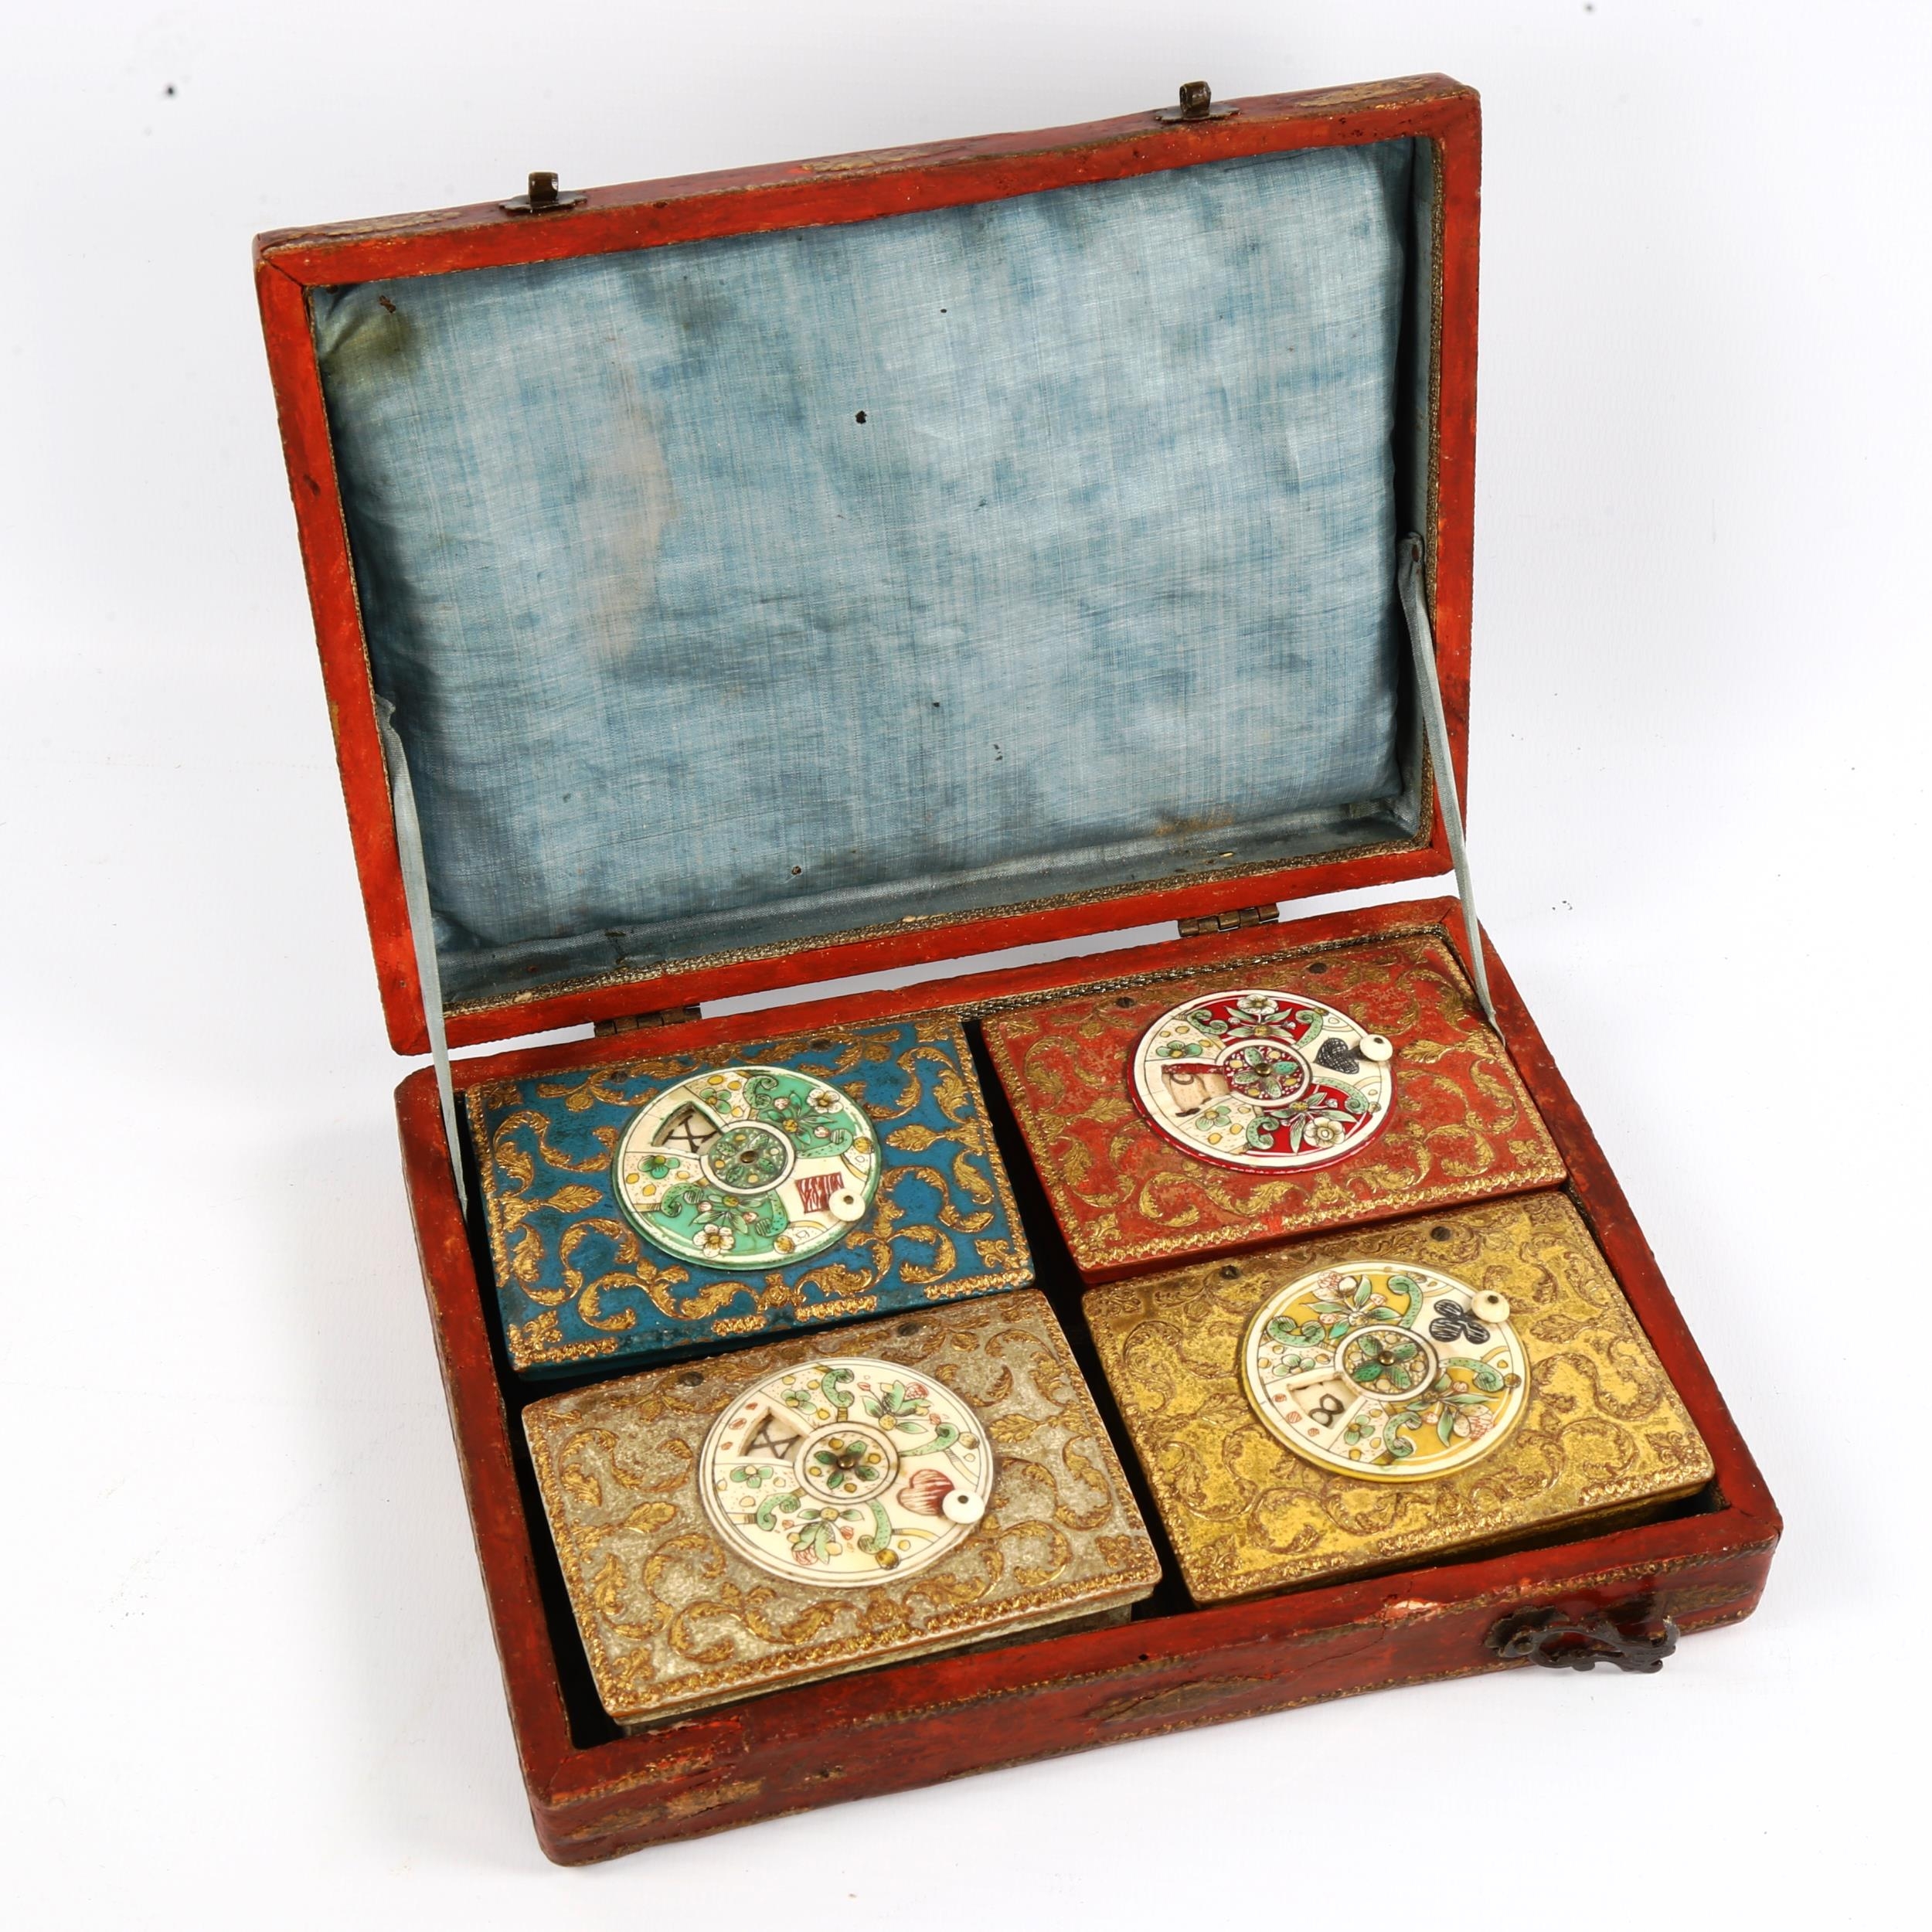 MARIVAL LE JEUNE - 18th century games box, comprising 4 parcel gilded rectangular boxes with - Image 5 of 5